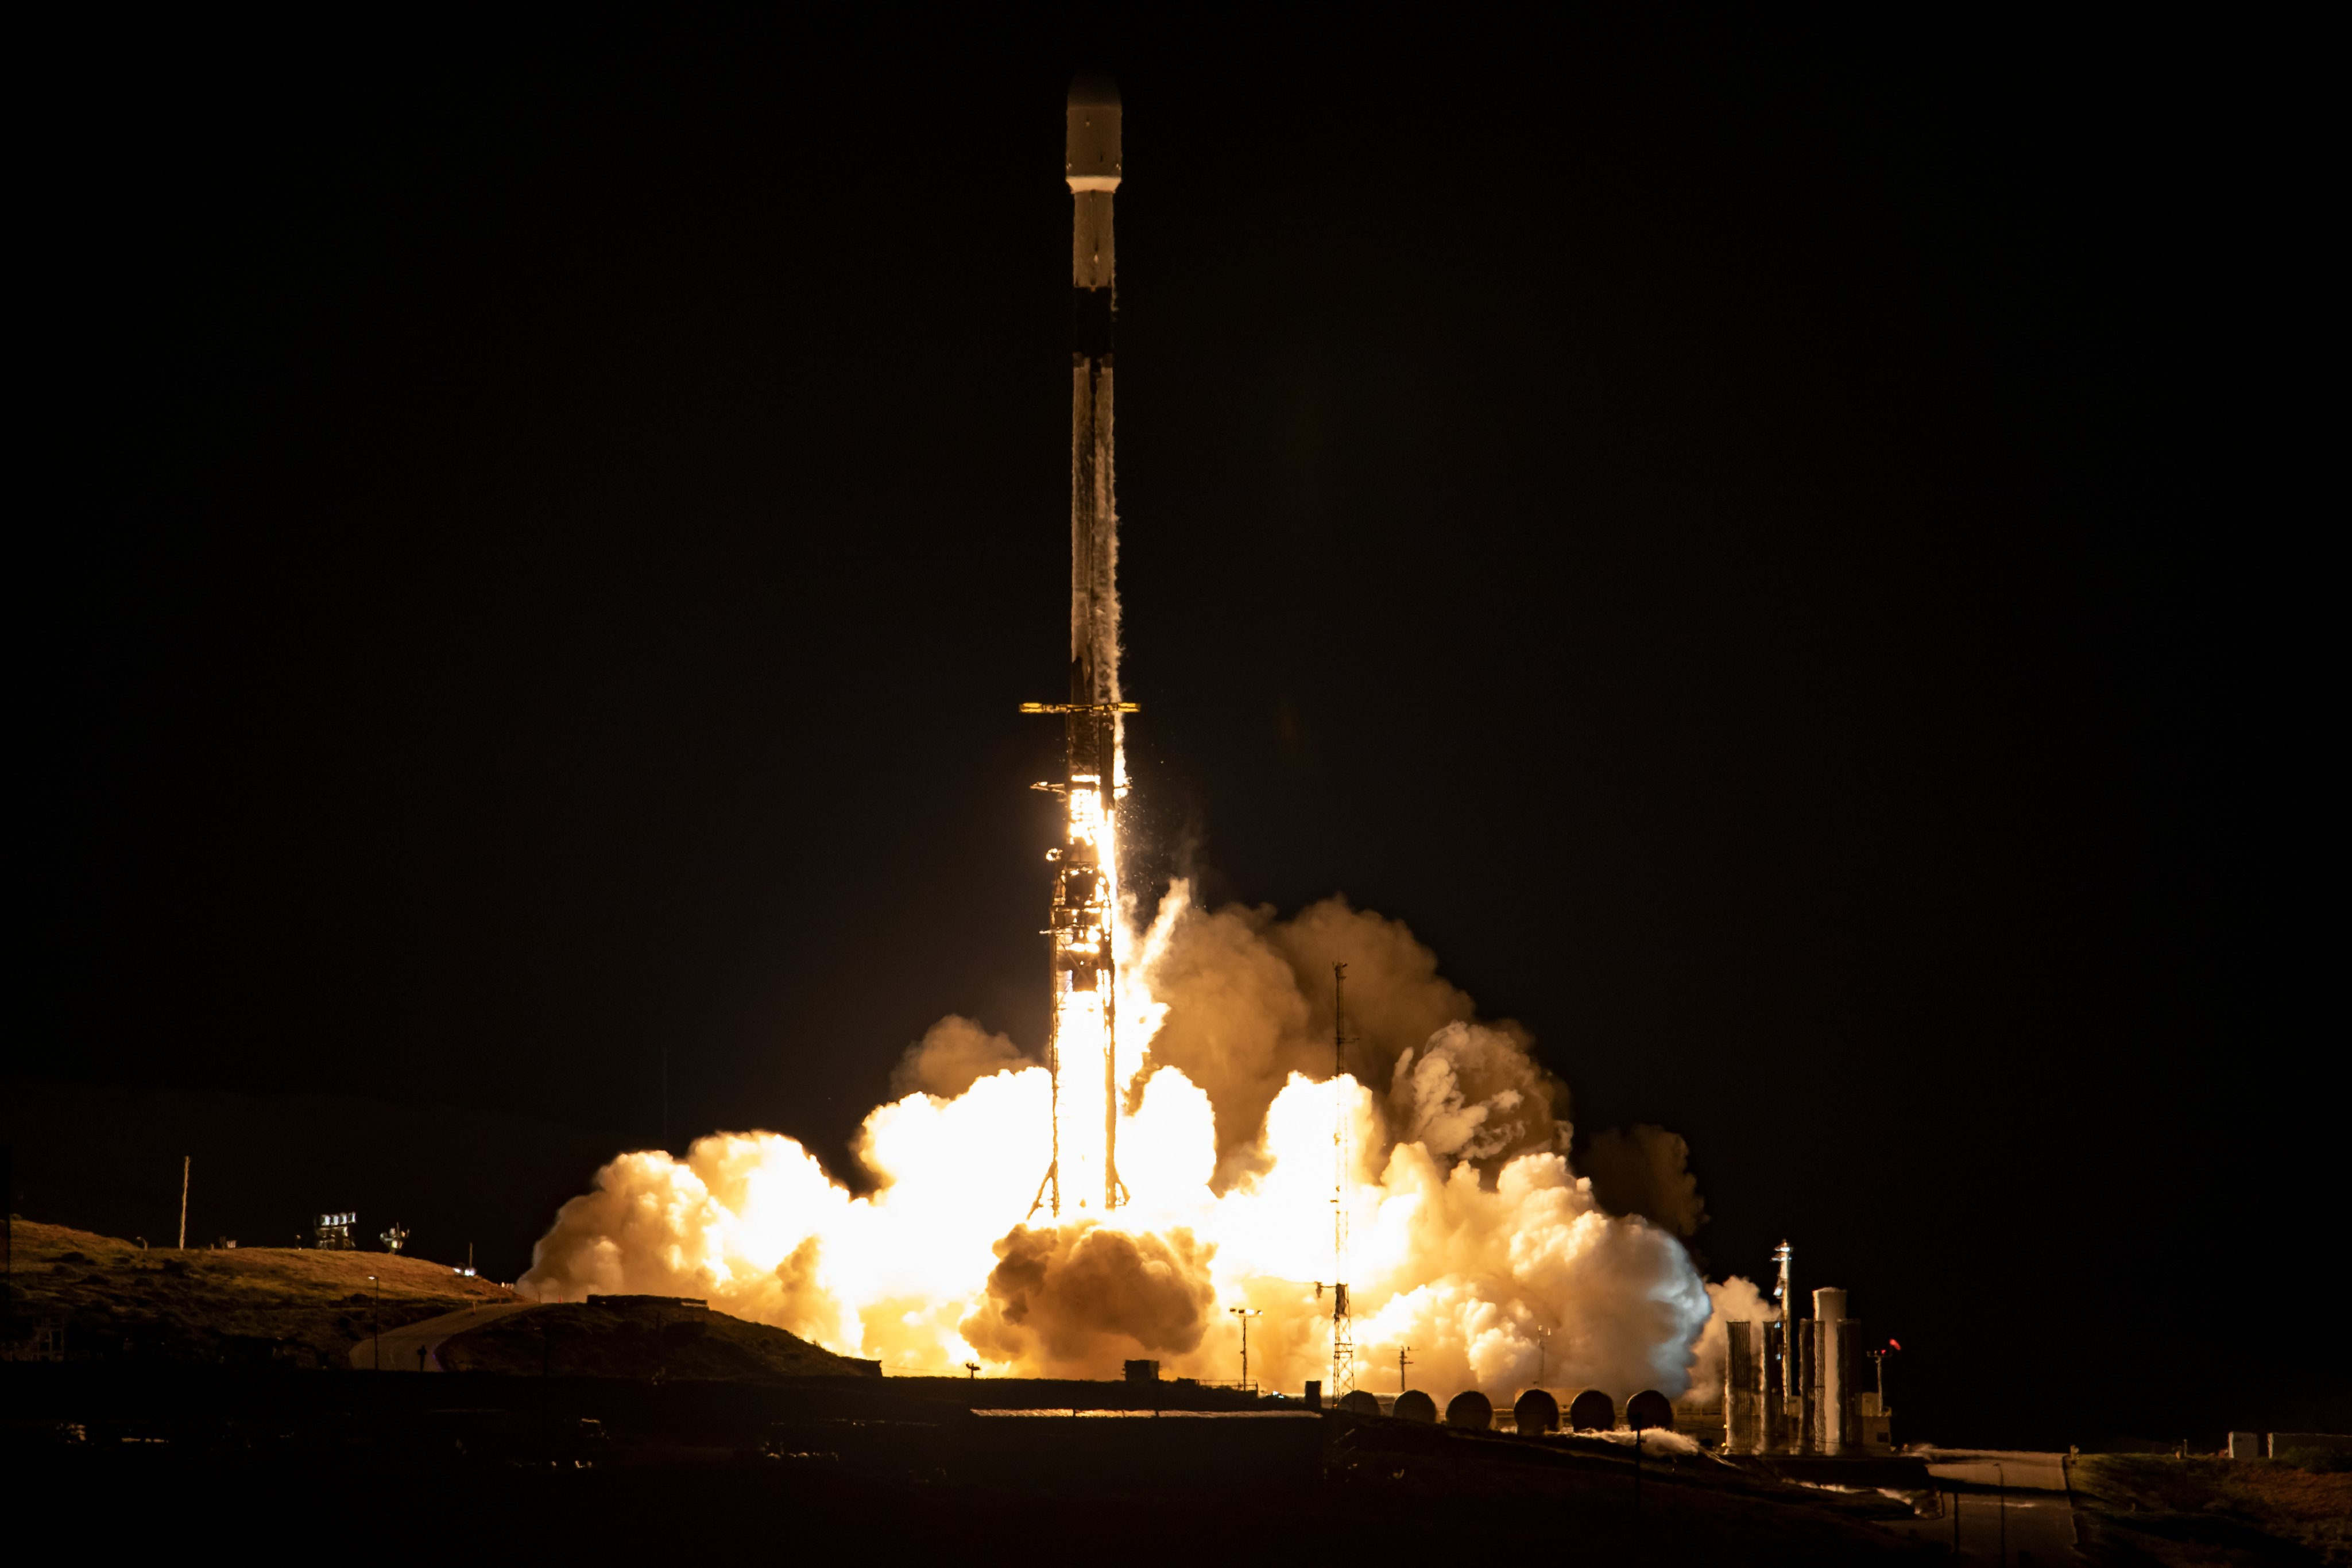 SpaceX and NASA send a satellite into space to observe the world's oceans from an altitude of 891 kilometers